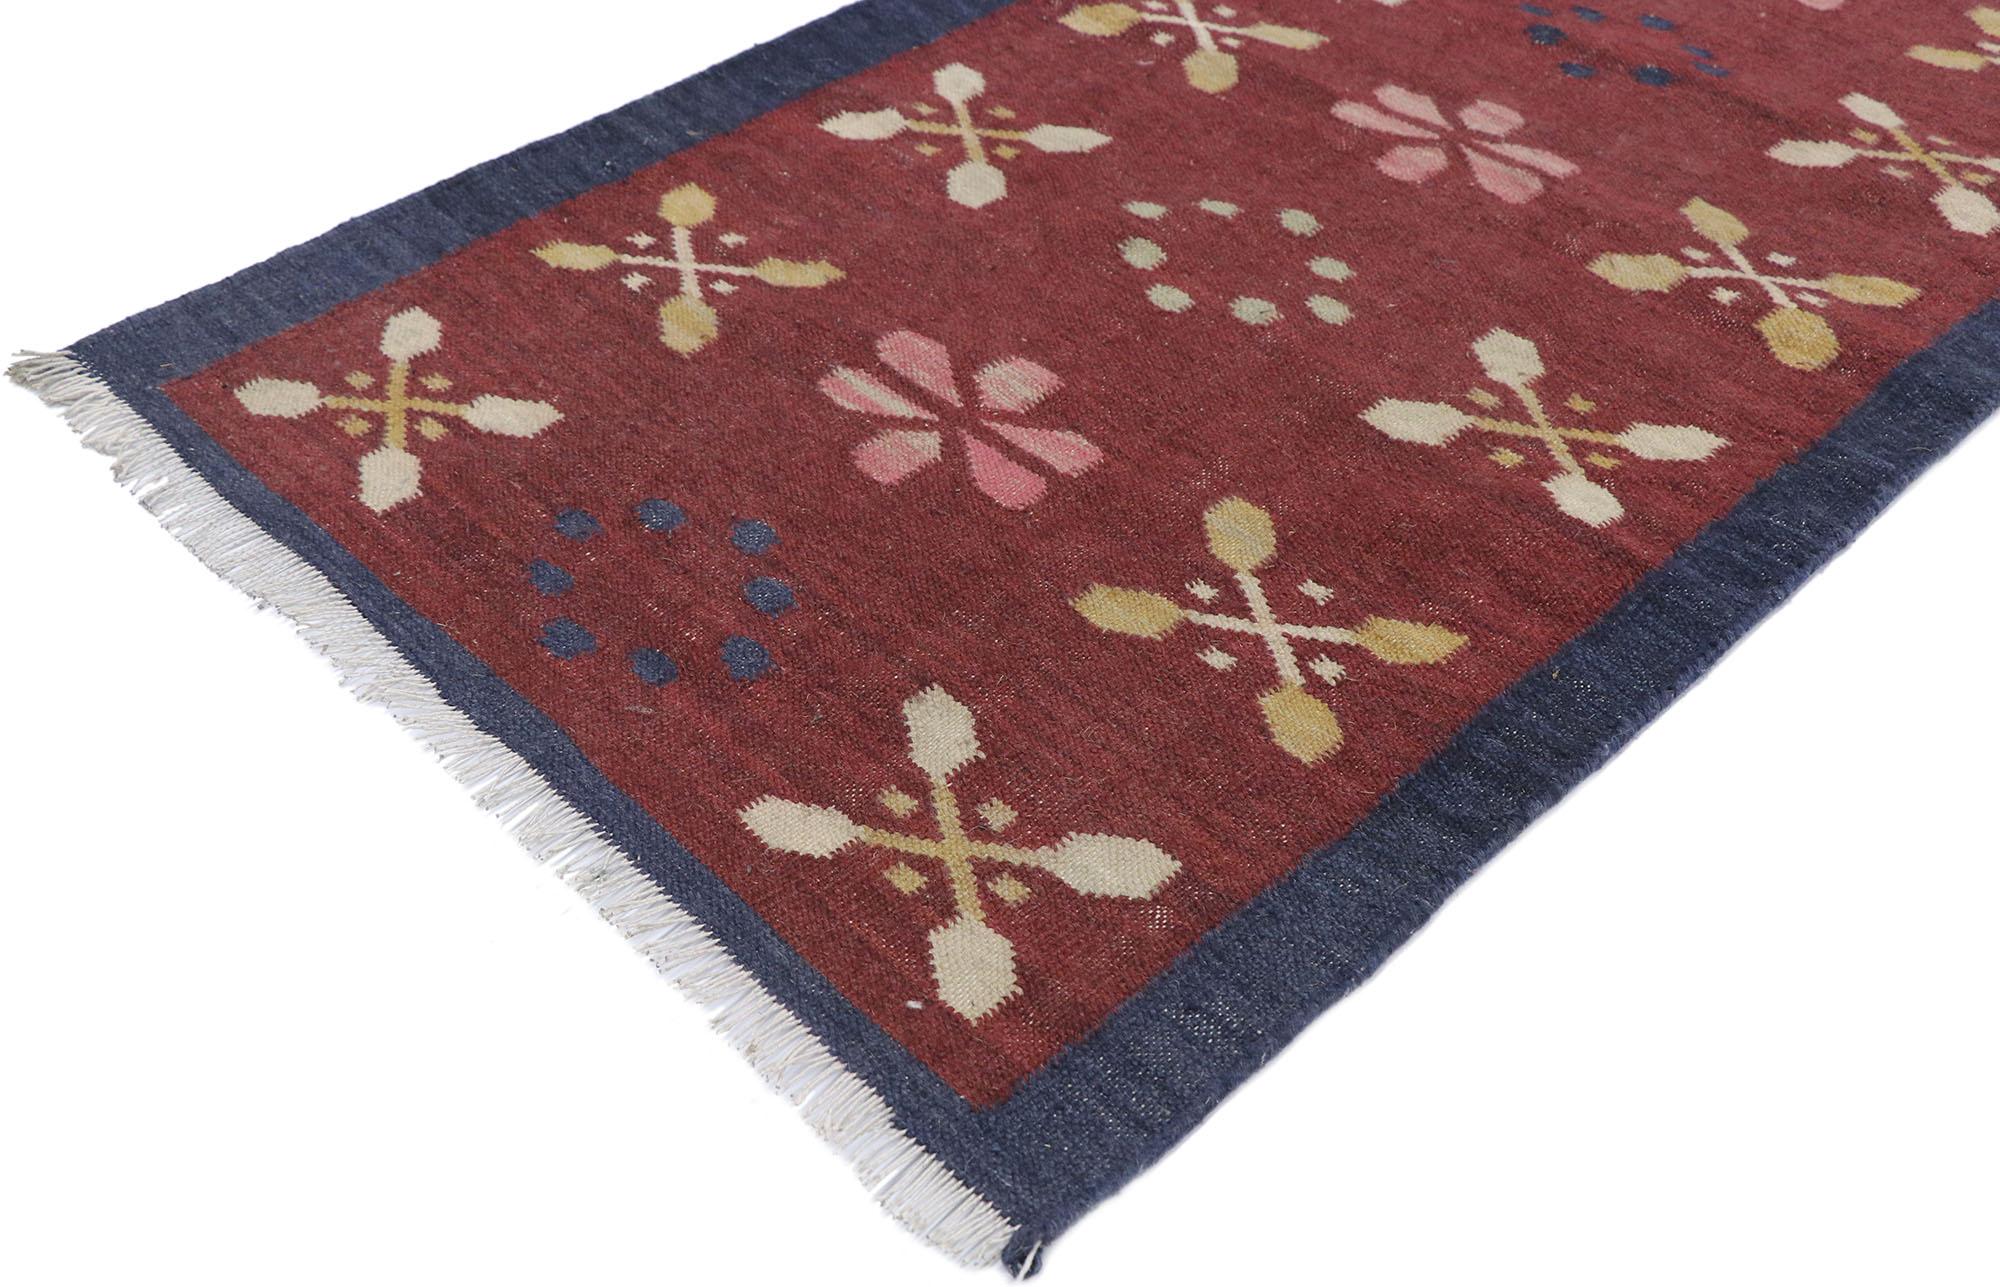 77649 Vintage Romanian Kilim rug with Boho Chic Farmhouse style 02'08 x 04'03. Bright and versatile, this hand-woven wool vintage Romanian floral kilim rug beautifully embodies a boho farmhouse style. The abrashed warm maroon field features an